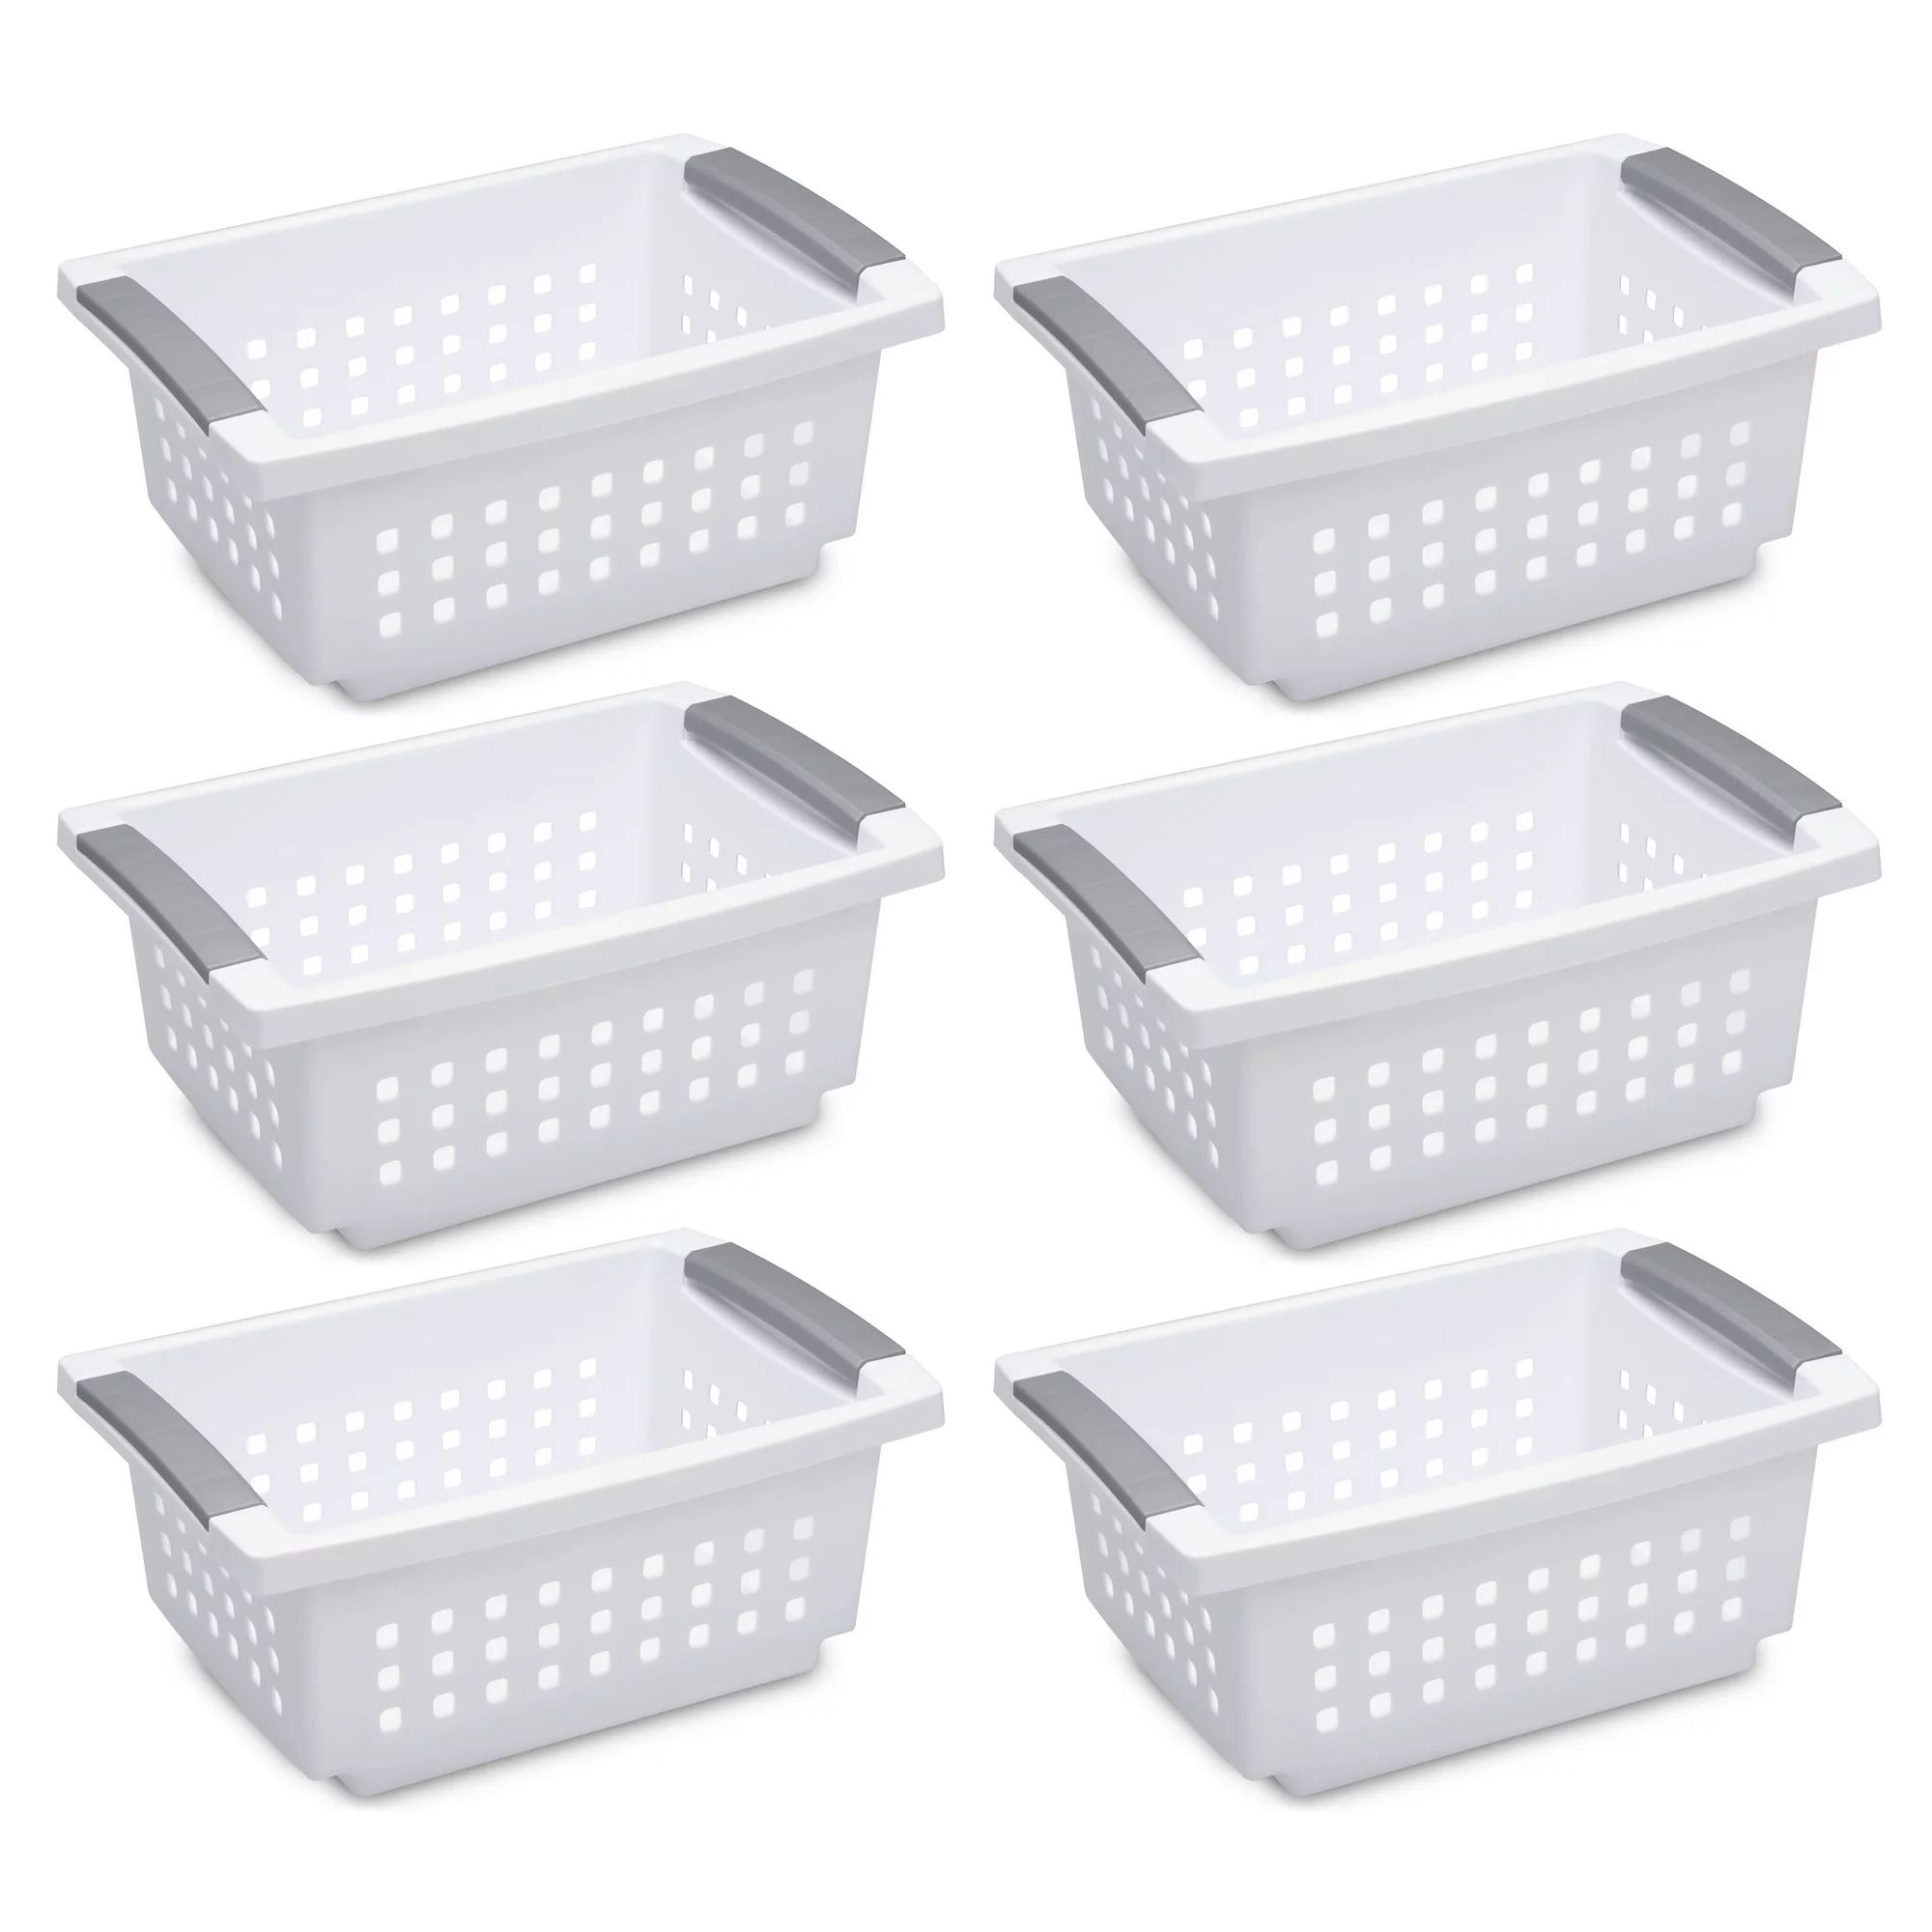 Sterilite 16608008 Small Stacking Basket with Titanium Accents, White (8 Pack) | Walmart (US)